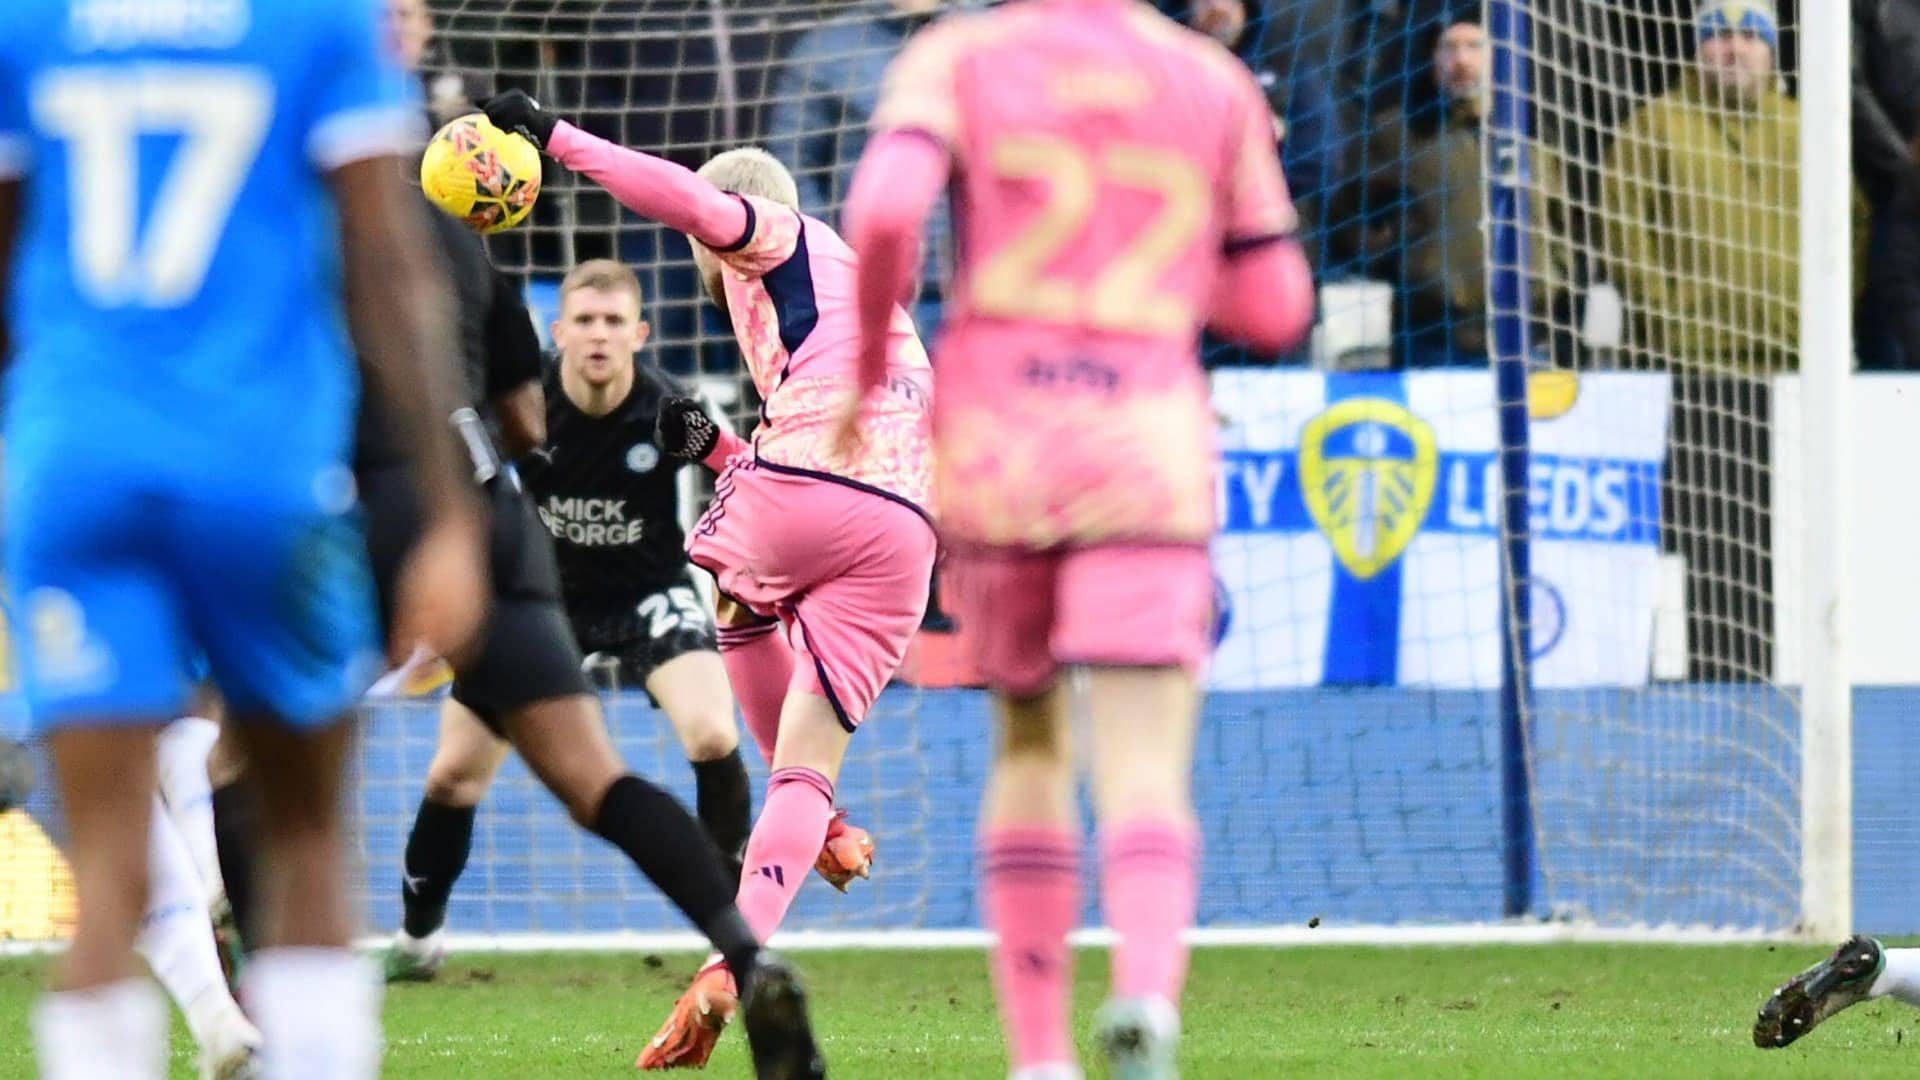 A view from behind Archie Gray as, up the field, the ball leaves Pat Bamford's foot — we see him from the back immediately apres volley — on its way to wondergoal status in Peterborough's top corner